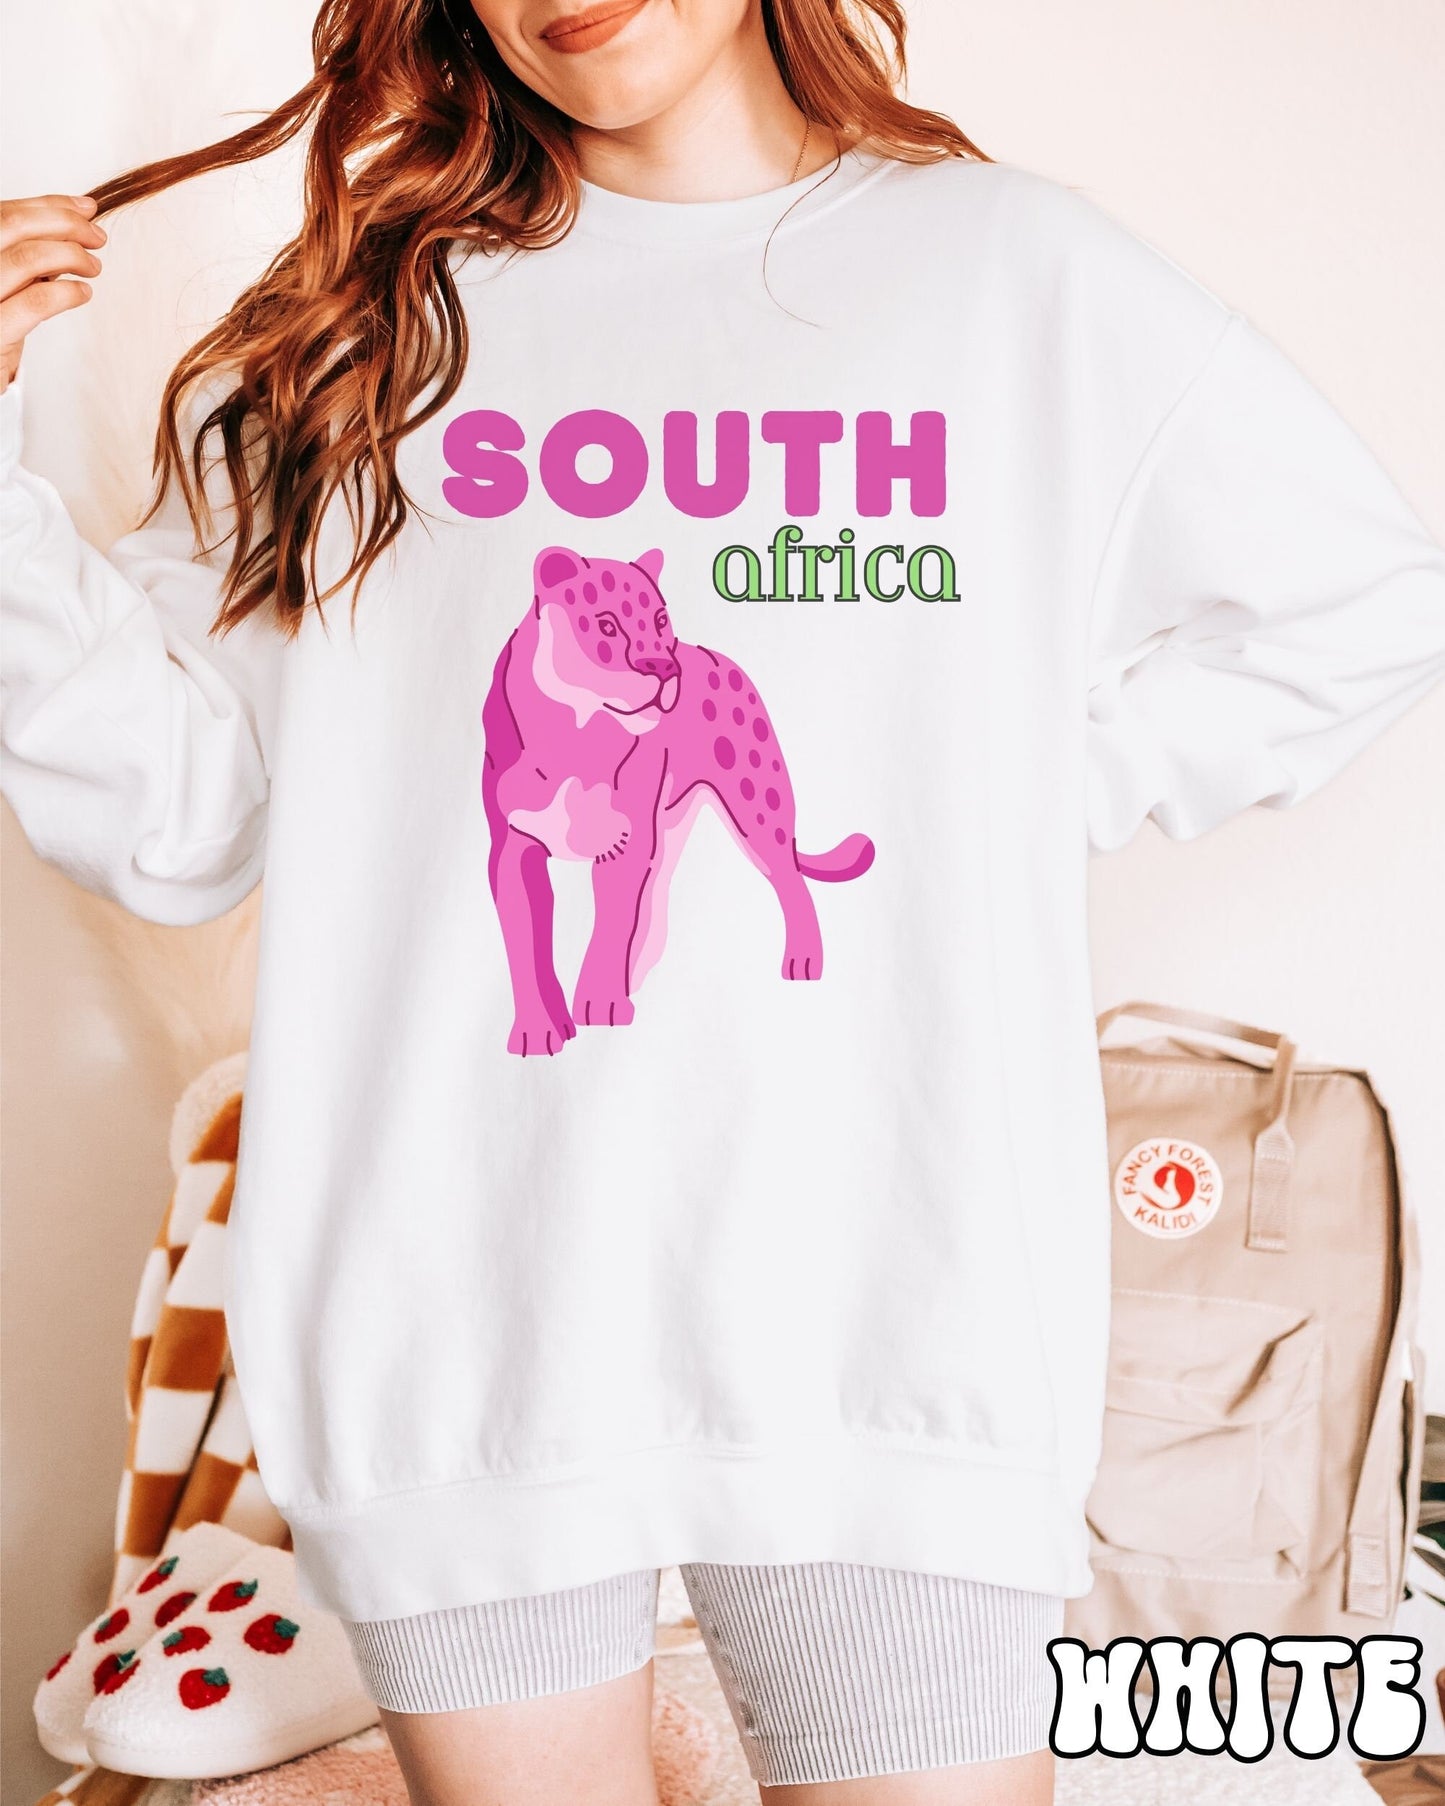 A woman wearing a vintage, white colored sweatshirt with the text South Africa in pink and green font, respectively, and a pink tiger underneath on the prowl.